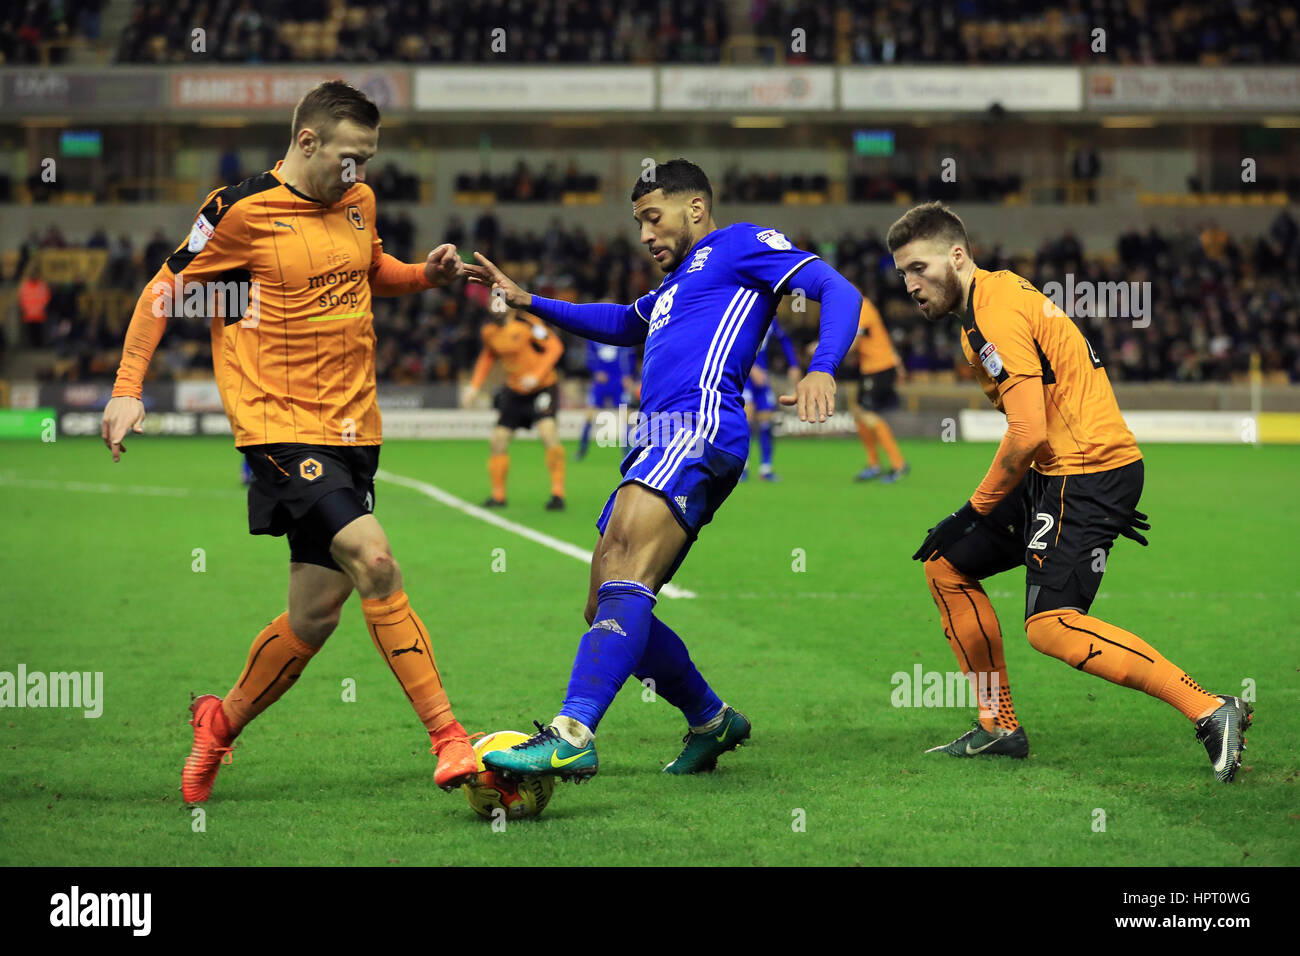 Birmingham City's David Davis (centre) in action with Wolverhampton Wanderers' Andreas Weimann (left) and Matt Doherty during the Sky Bet Championship match at Molineux, Wolverhampton. Stock Photo